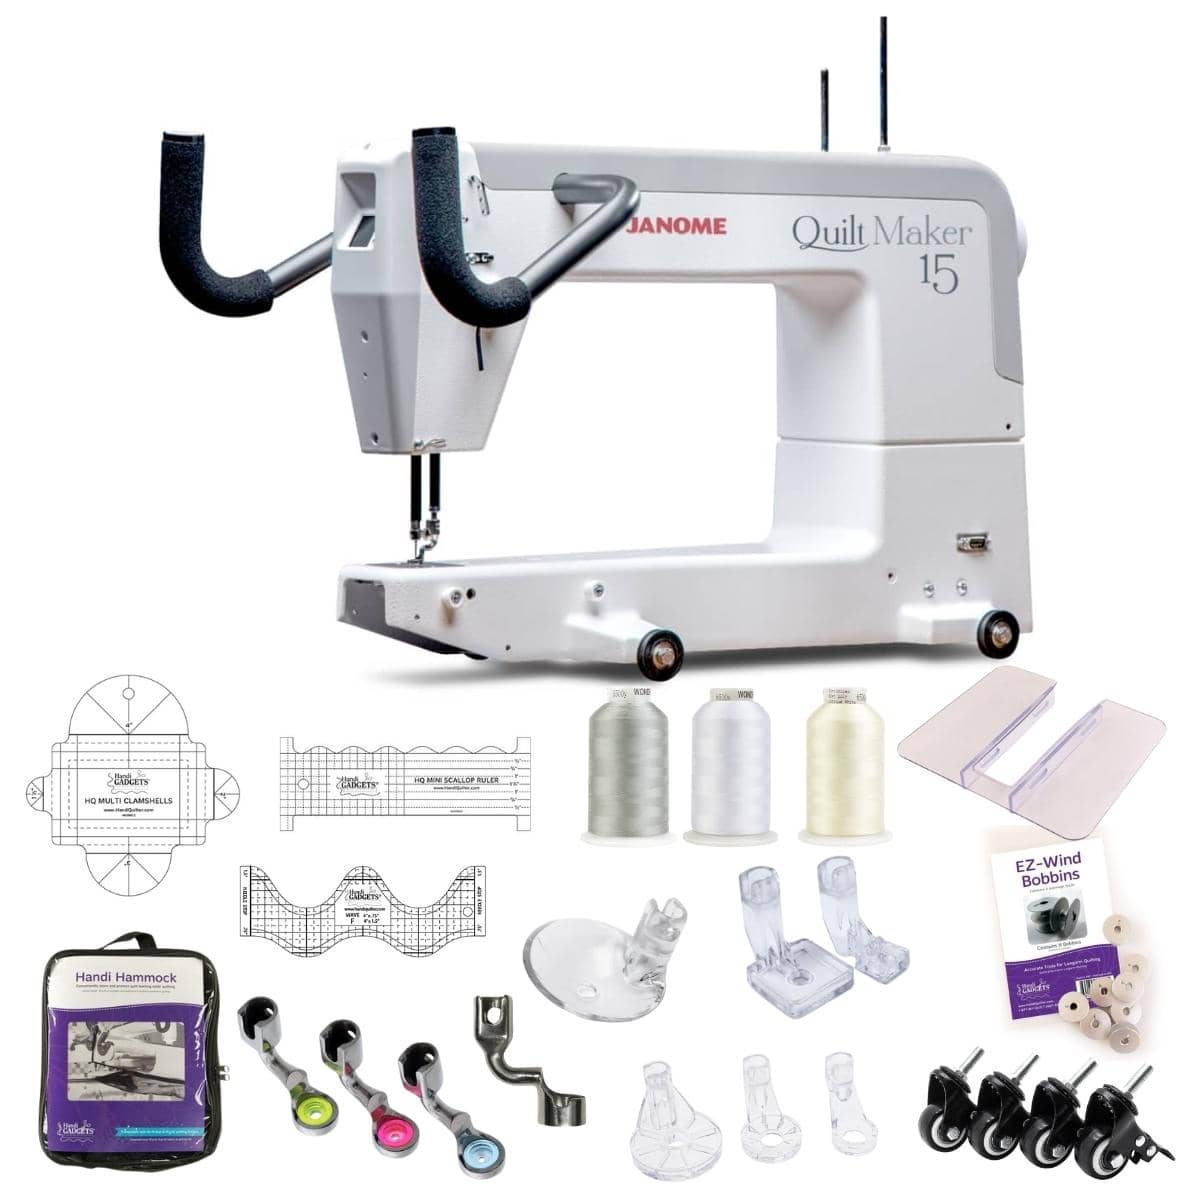 Quilting Attachment Kit, Janome #200100007 : Sewing Parts Online